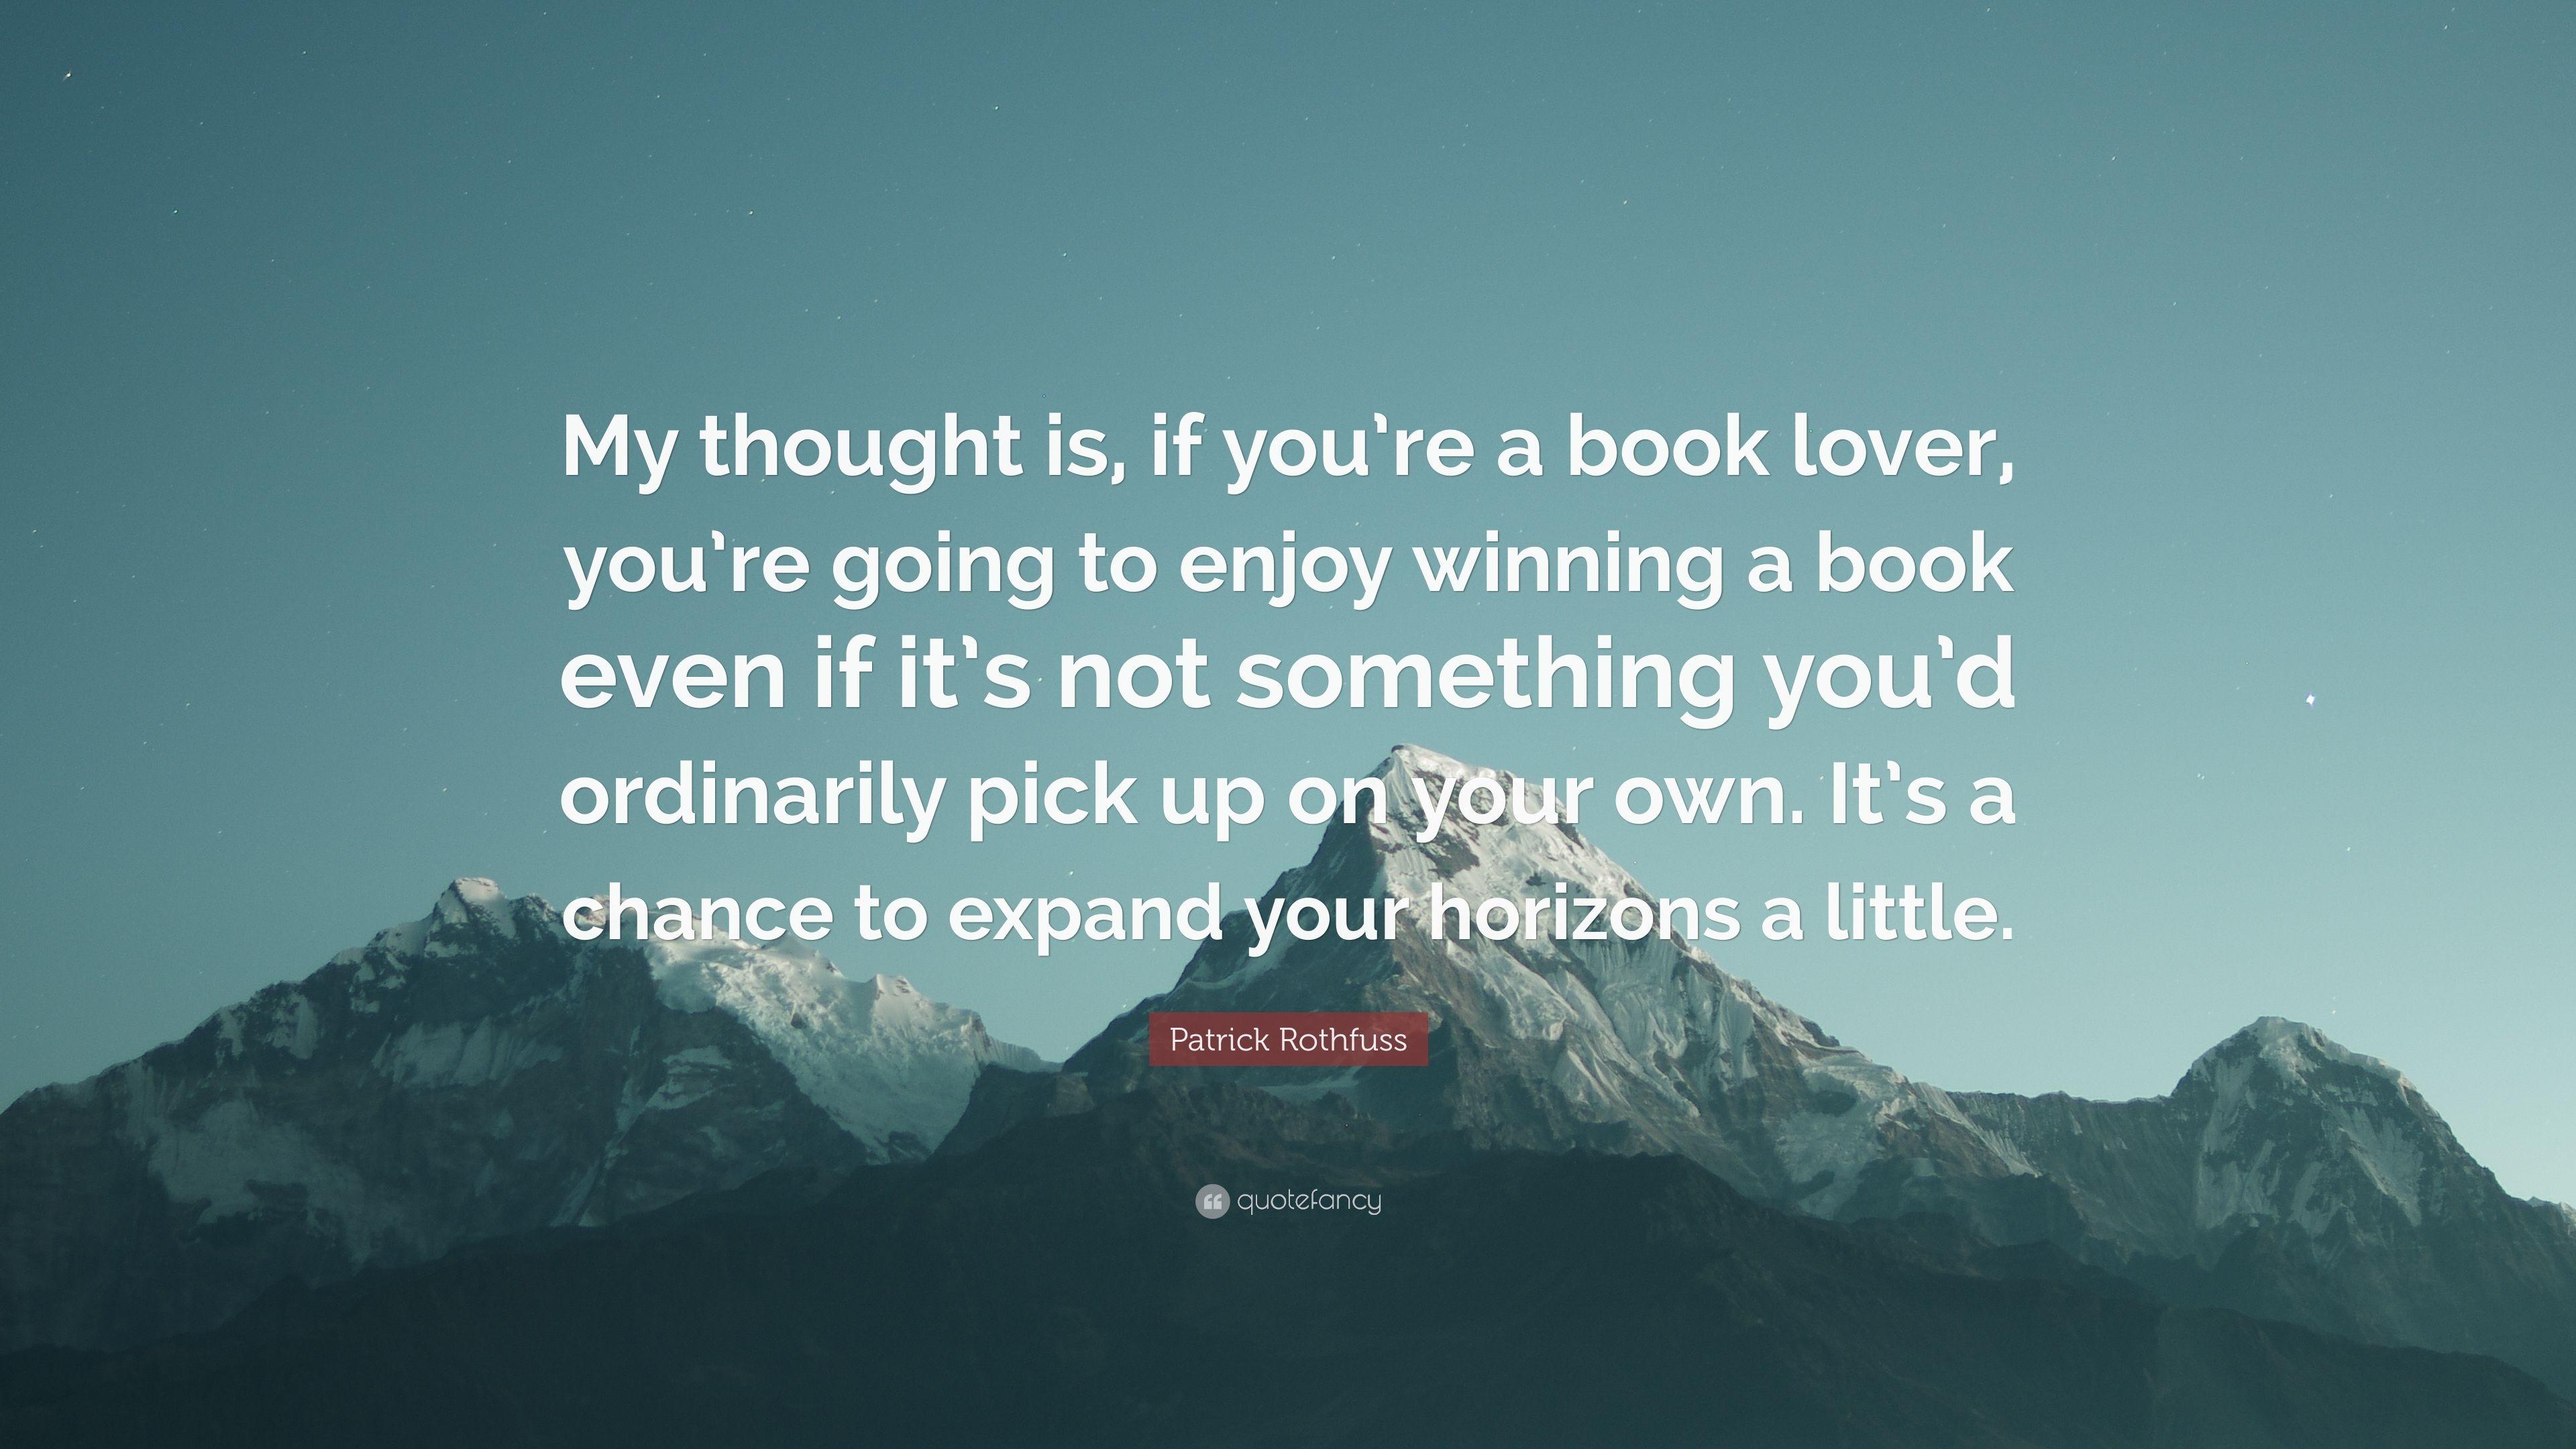 Patrick Rothfuss Quote: “My thought is, if you're a book lover